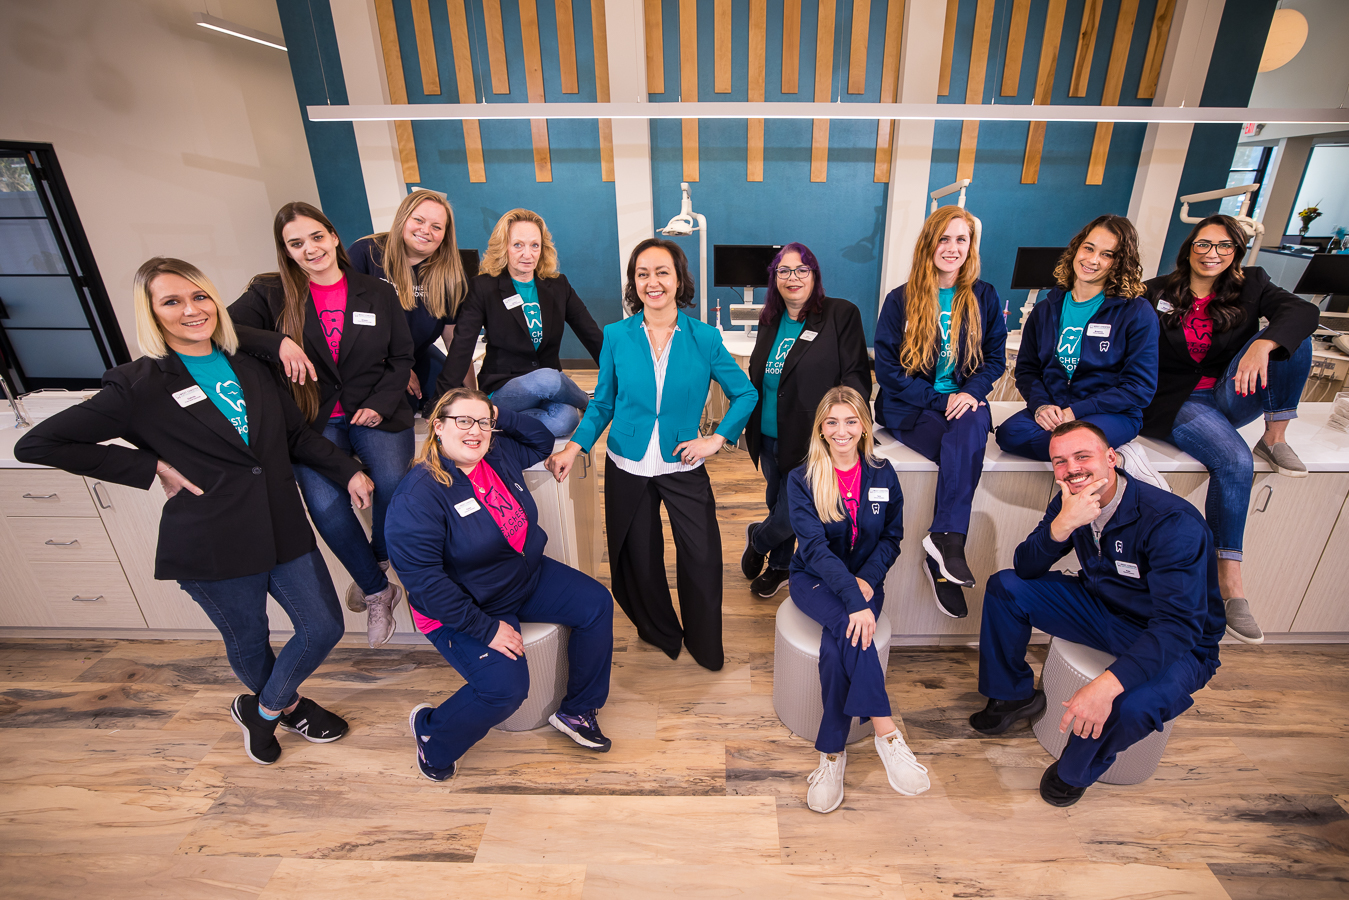 commerical photographer, lisa rhinehart captures this image of west chester orthodontics full staff as they pose together and smile at the camera while wearing vibrant teal and fuschia colored tops